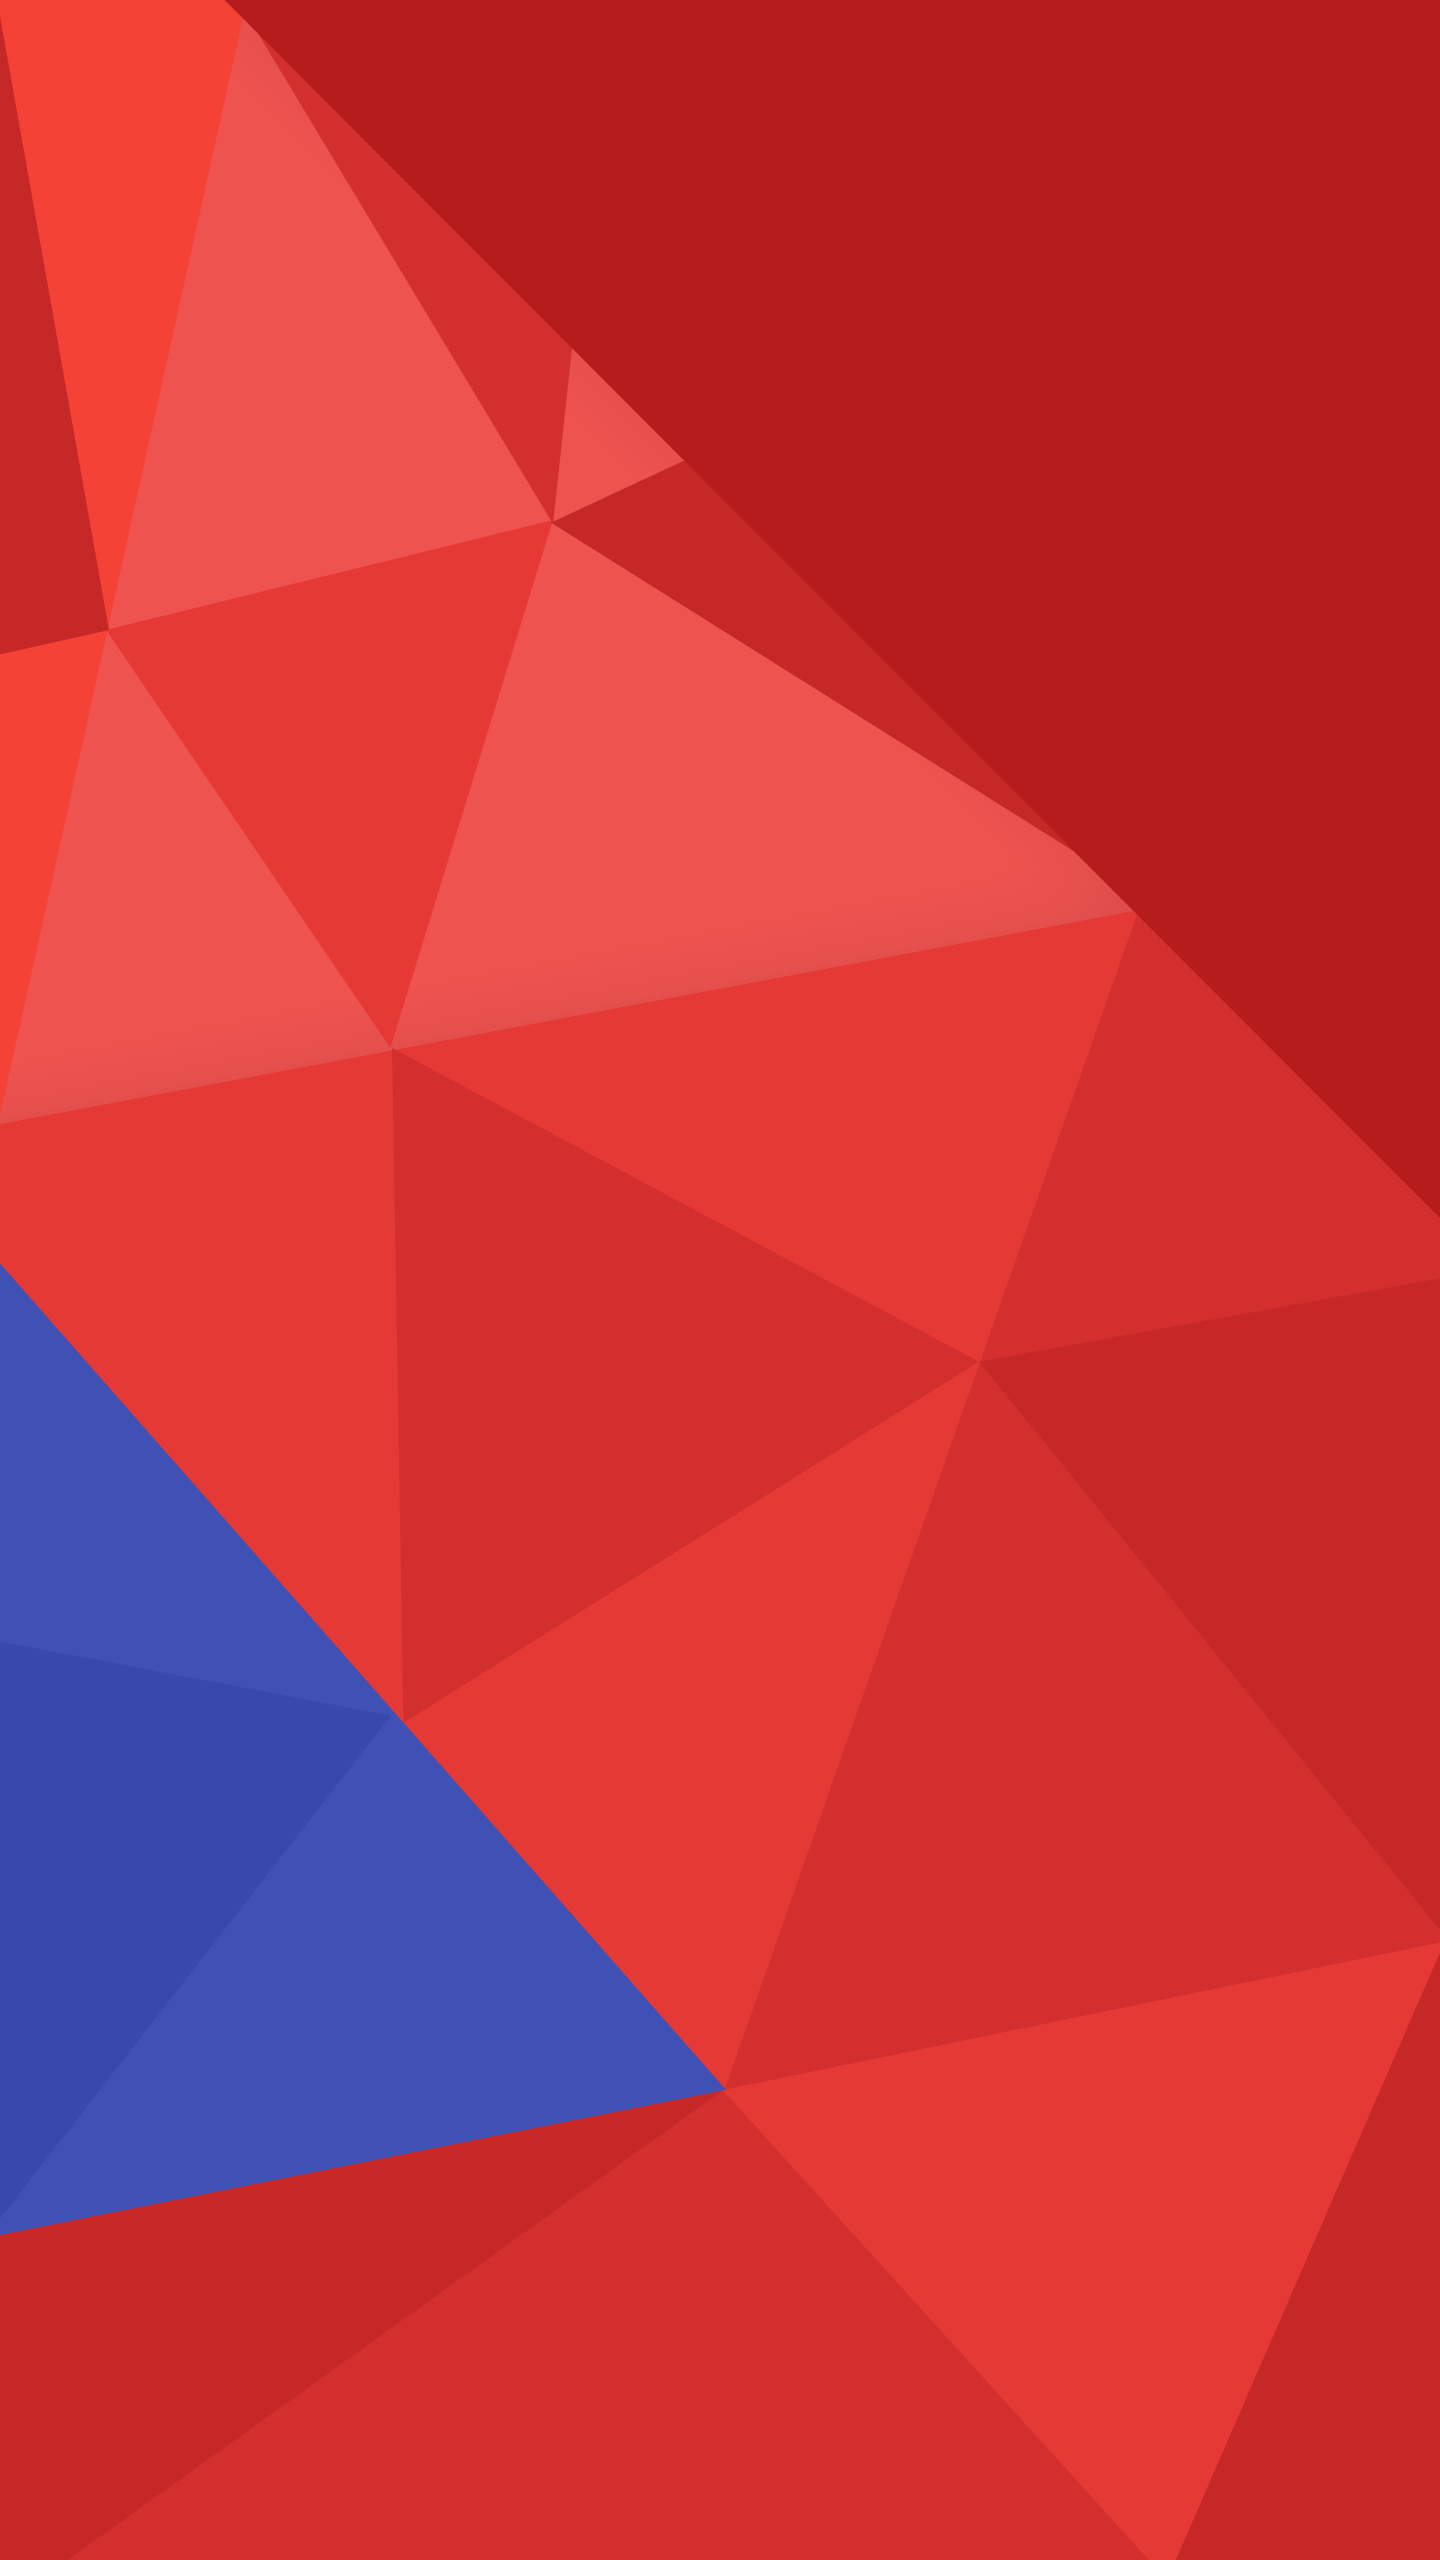 General 1440x2560 minimalism low poly abstract red geometric figures digital art